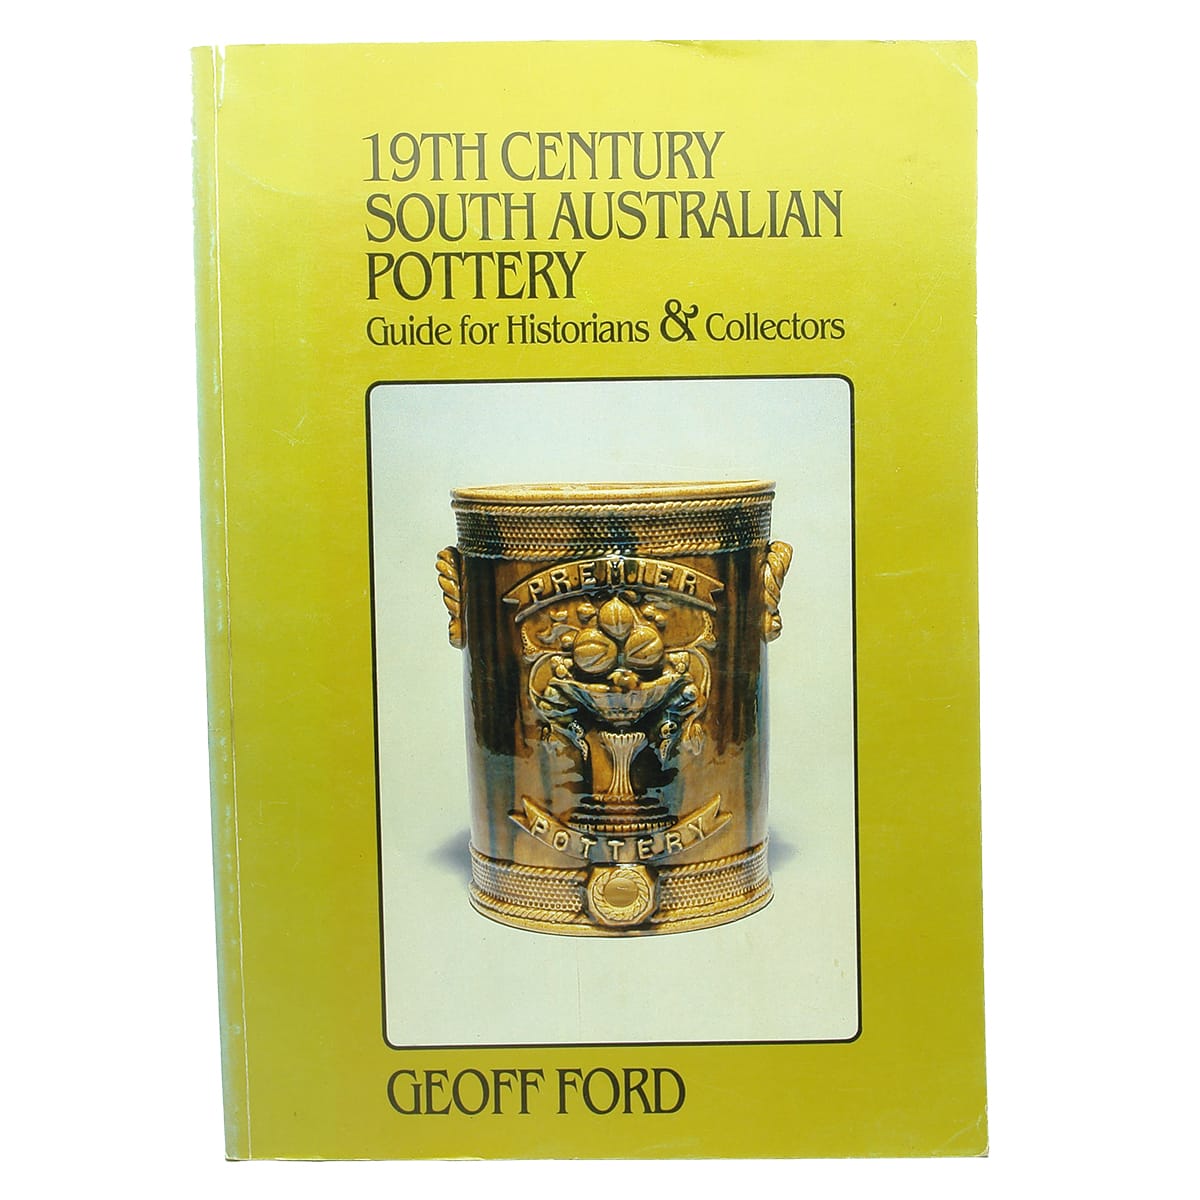 Book. 19th Century South Australian Pottery, Guide for Historians & Collectors, Geoff Ford, 1985.